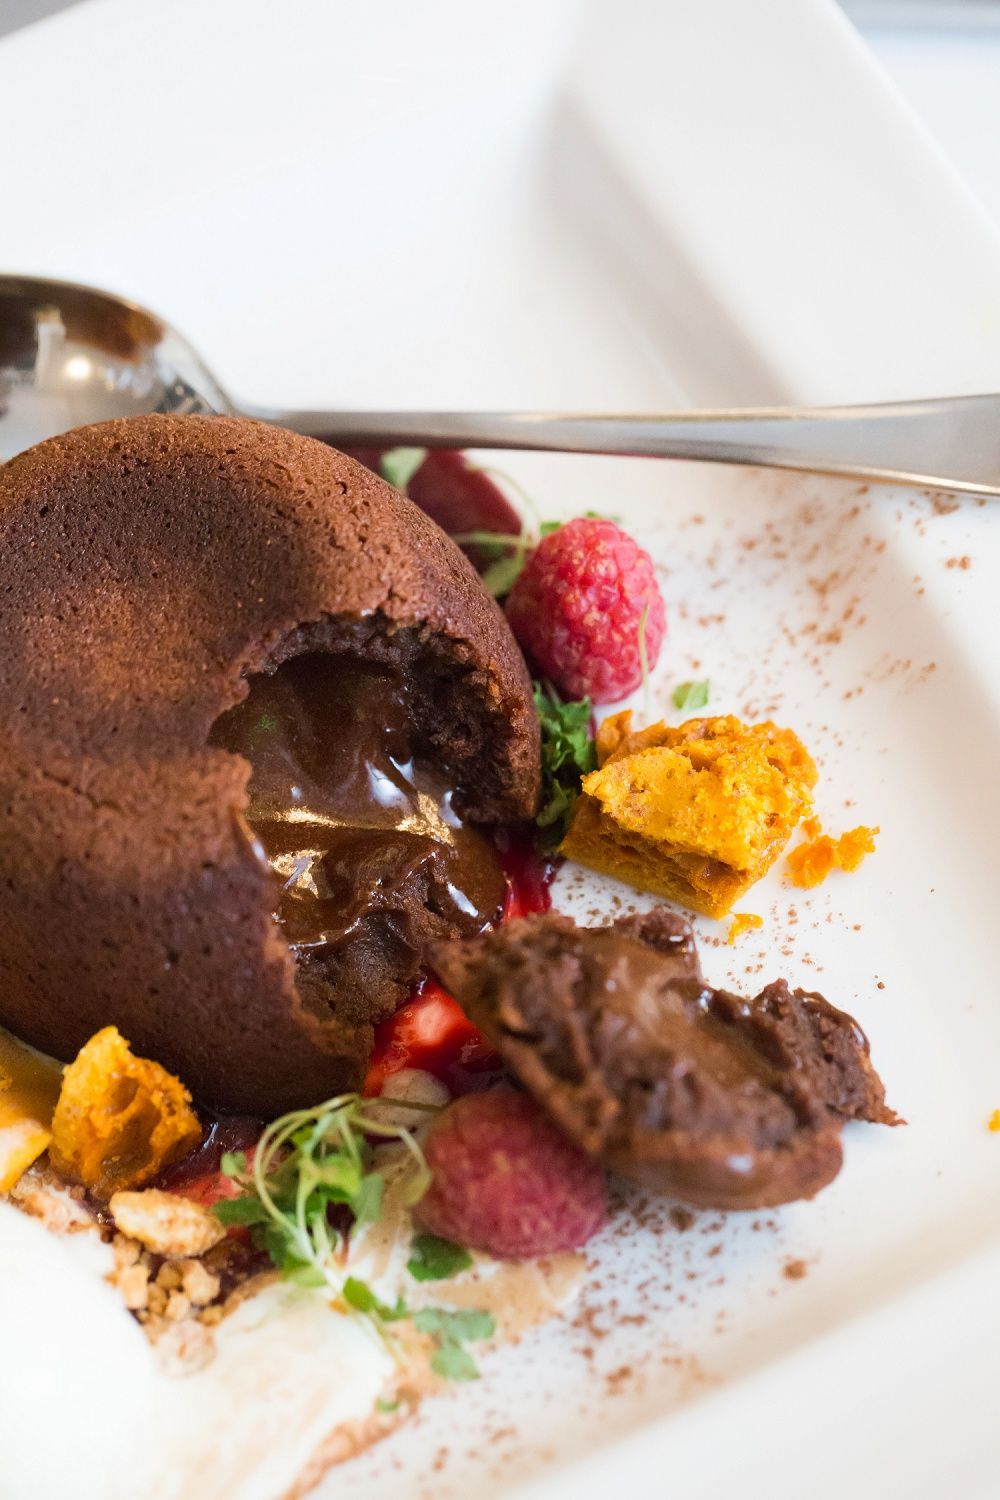 a close up of a chocolate lava cake on a plate with strawberries and raspberries .